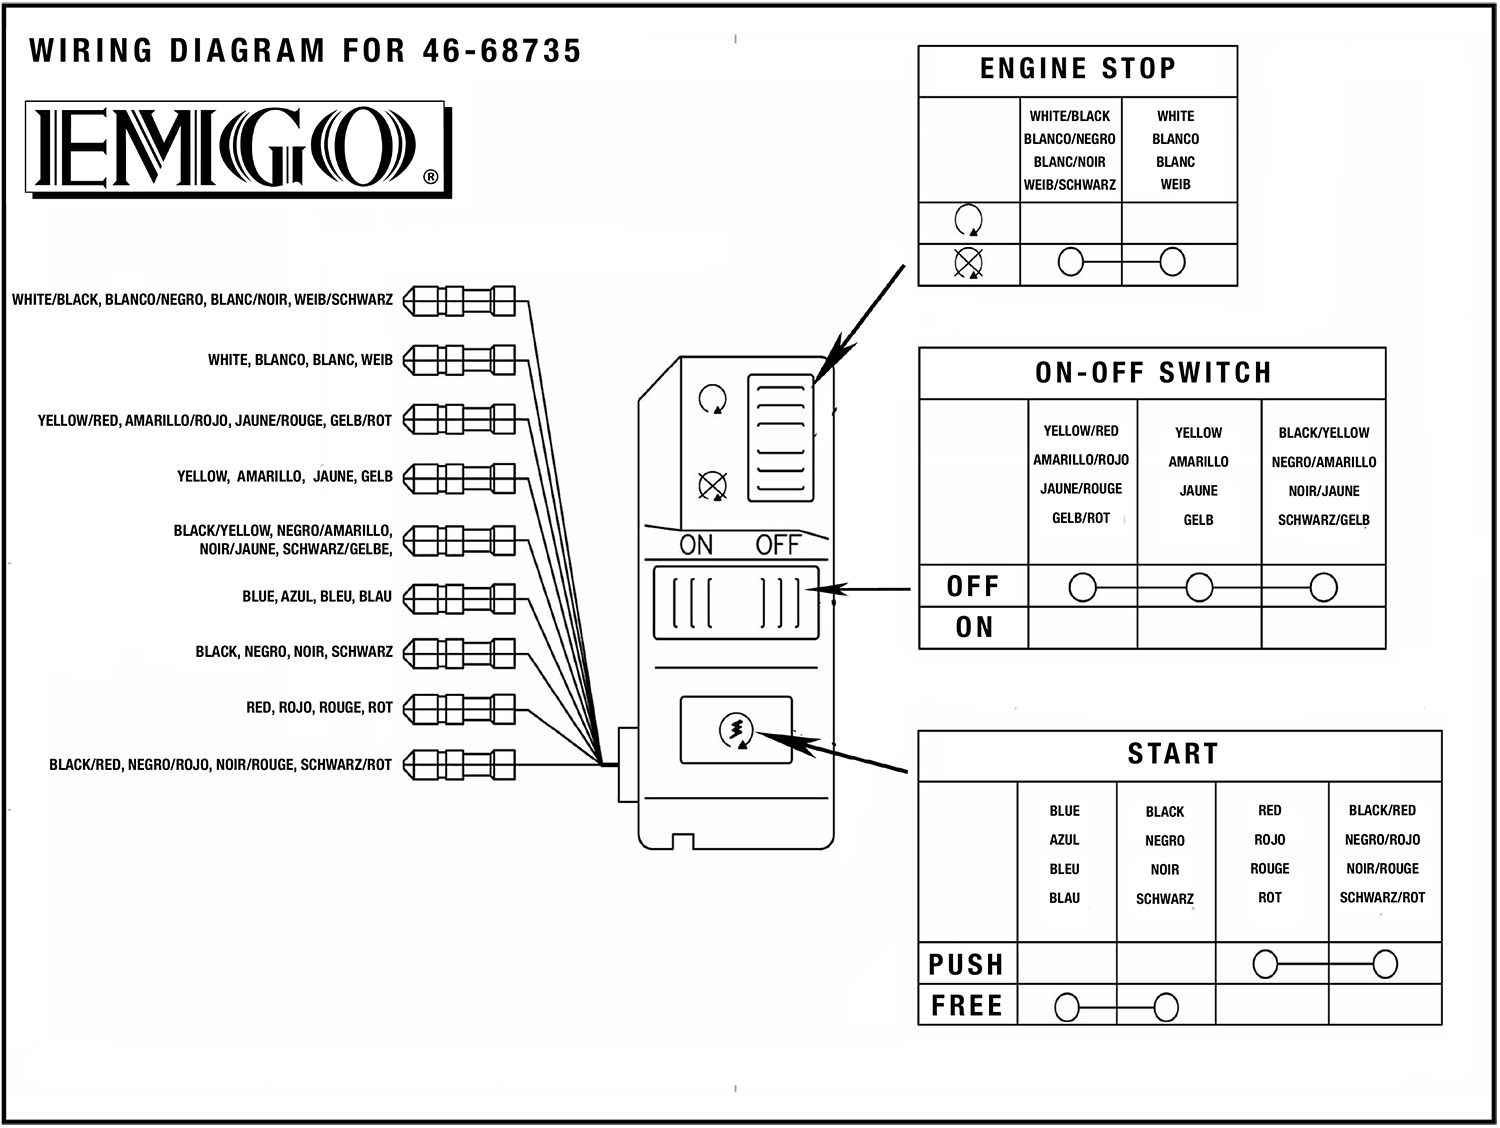 46-68735-wiring-diagram-emgo-universal-multi-switch-handlebar-motorcycle-dual-sport-cafe-pin-out-right.jpg